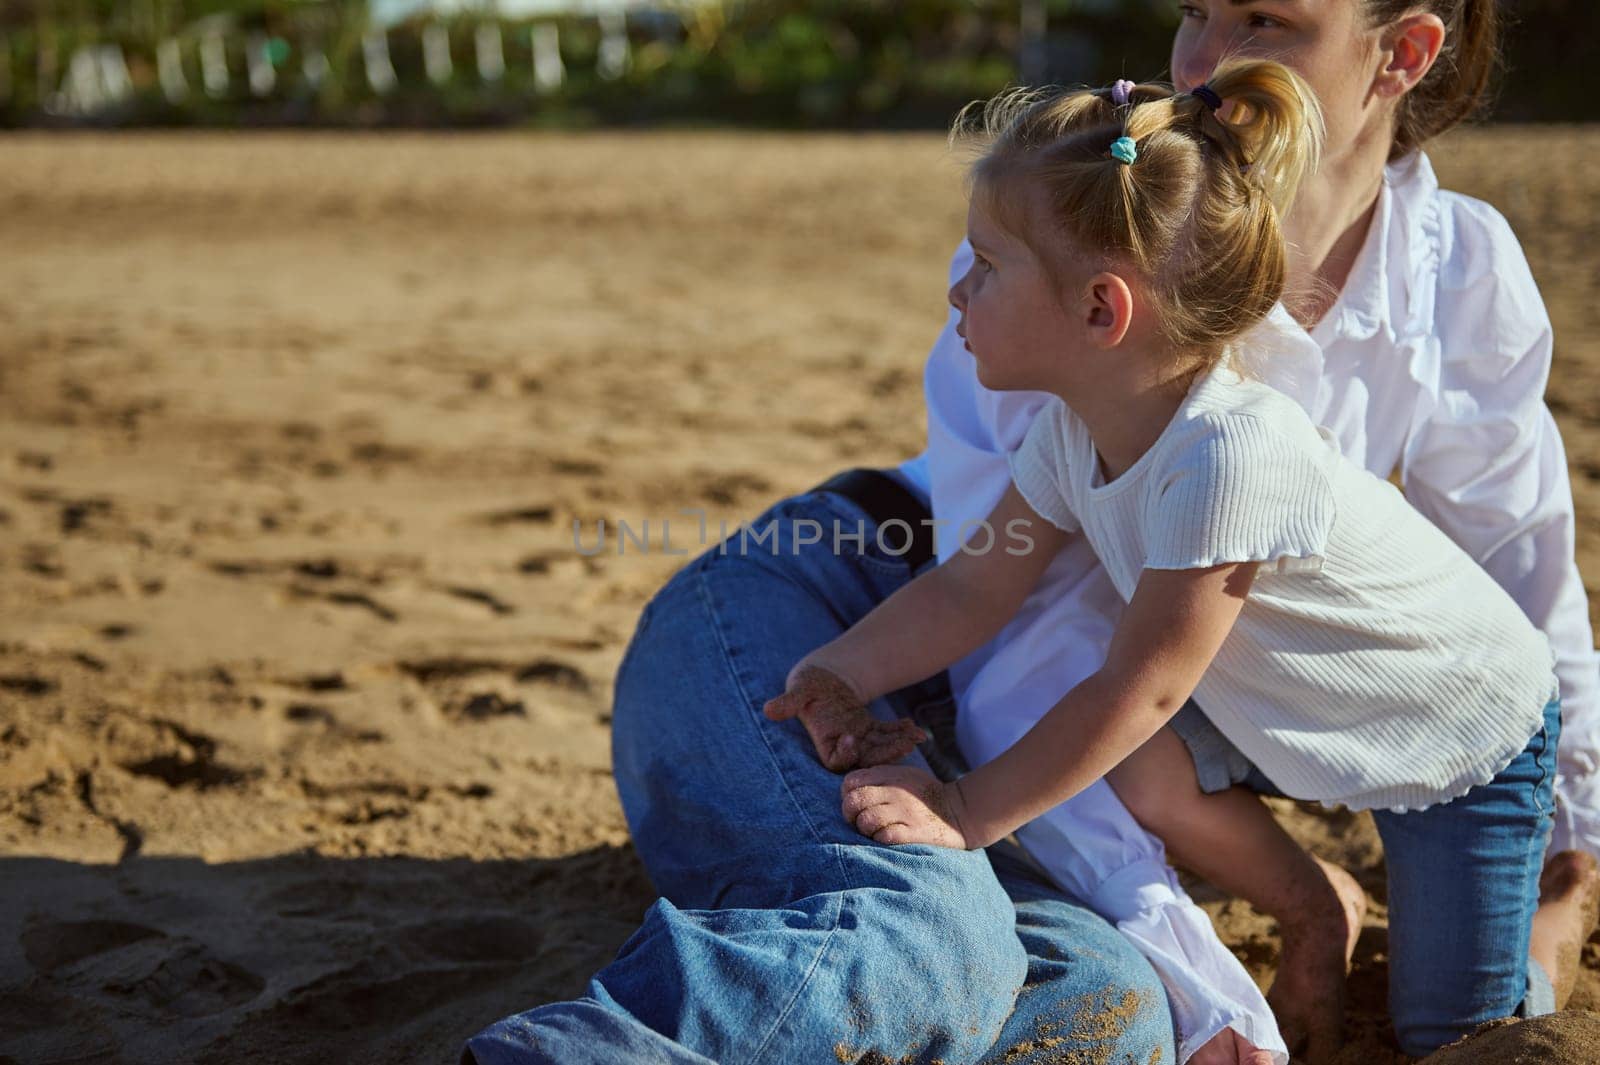 Authentic portrait of family of a happy young woman, loving mother enjoying happy moments with her cute little kid girl, playing together on the sandy beach at sunset. People and lifestyle concept